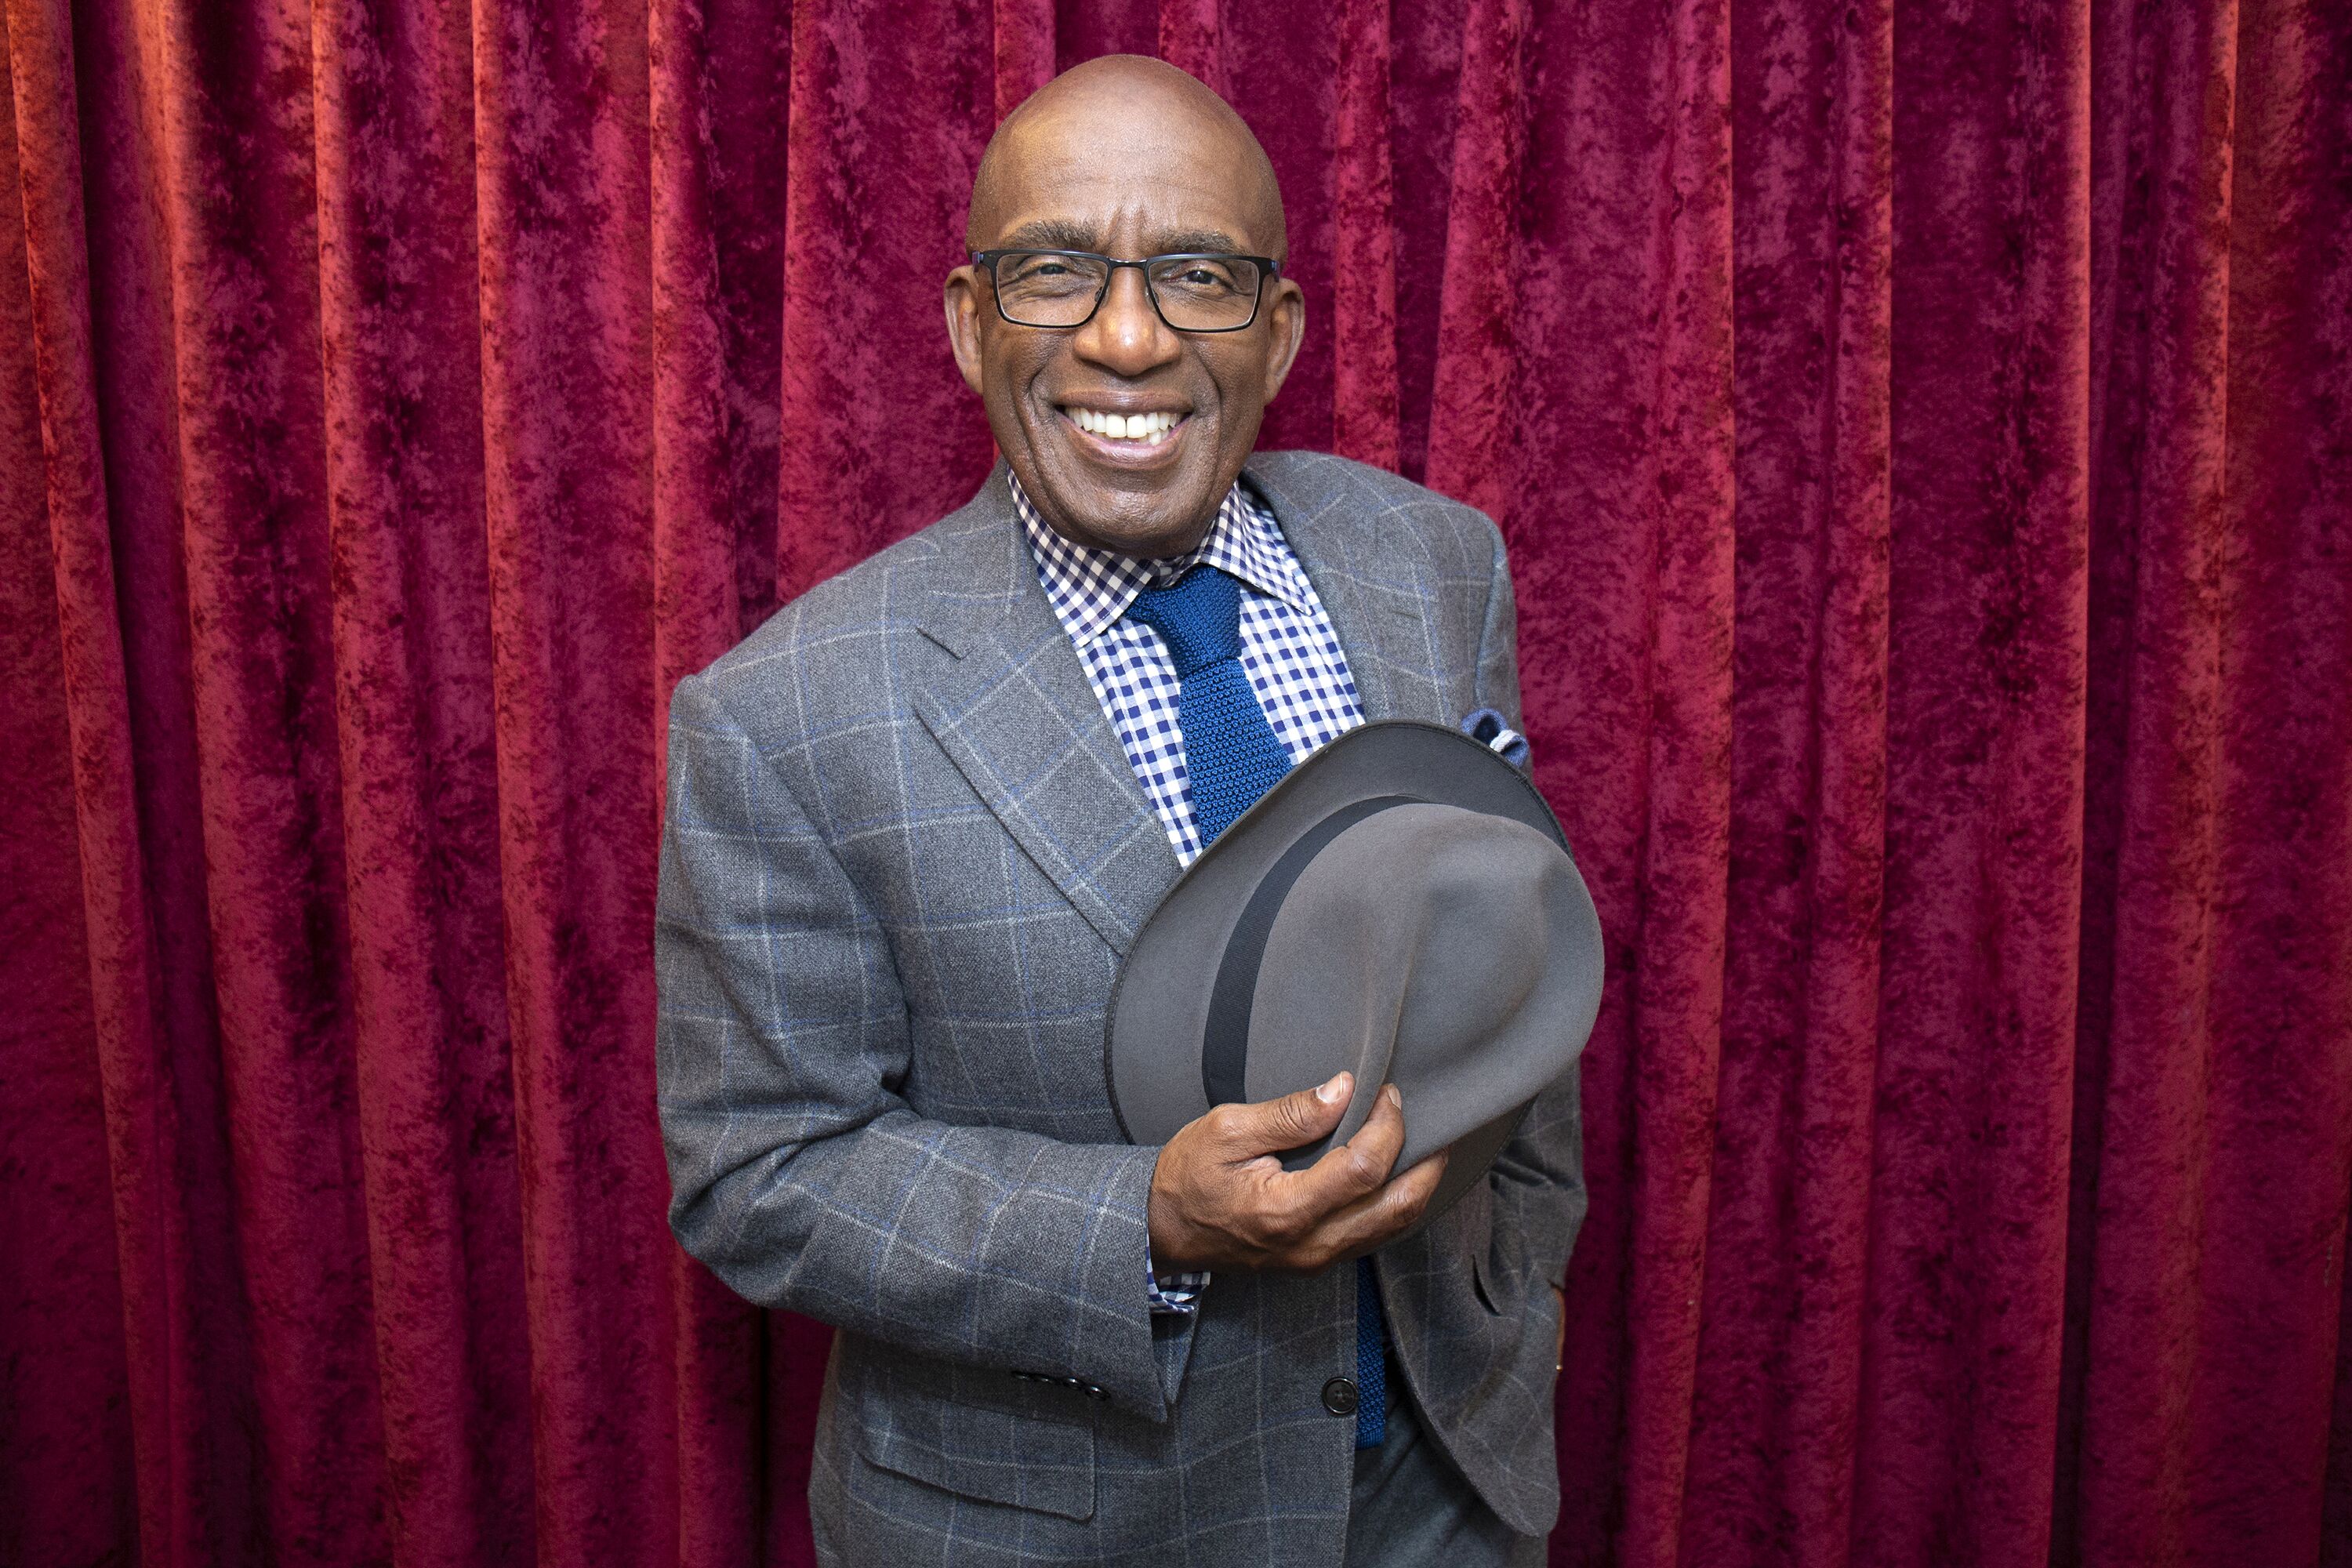 Al Roker visits SiriusXM Studios on October 2, 2018 in New York City. | Source: Getty Images